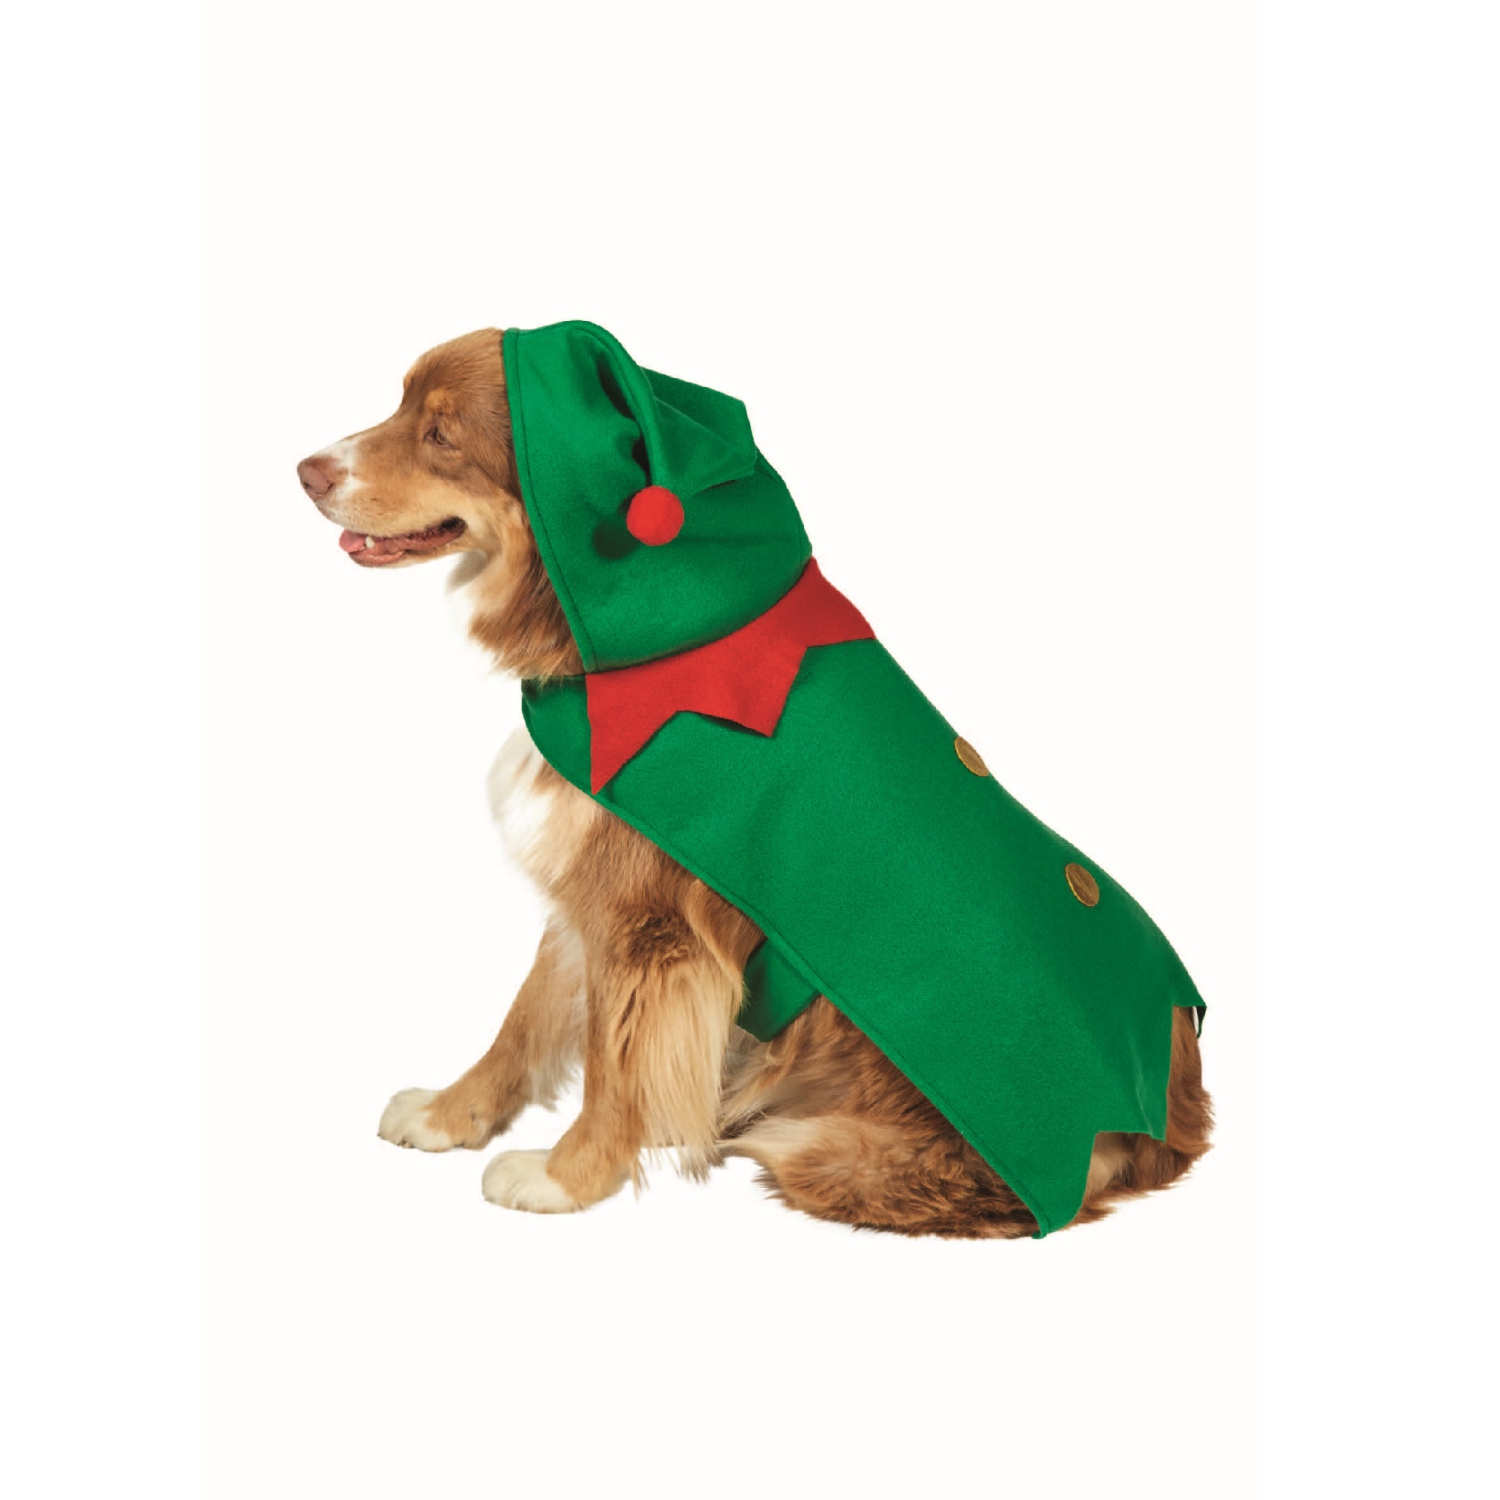 27" Green and Red Christmas Elf Dog Costume - Size S